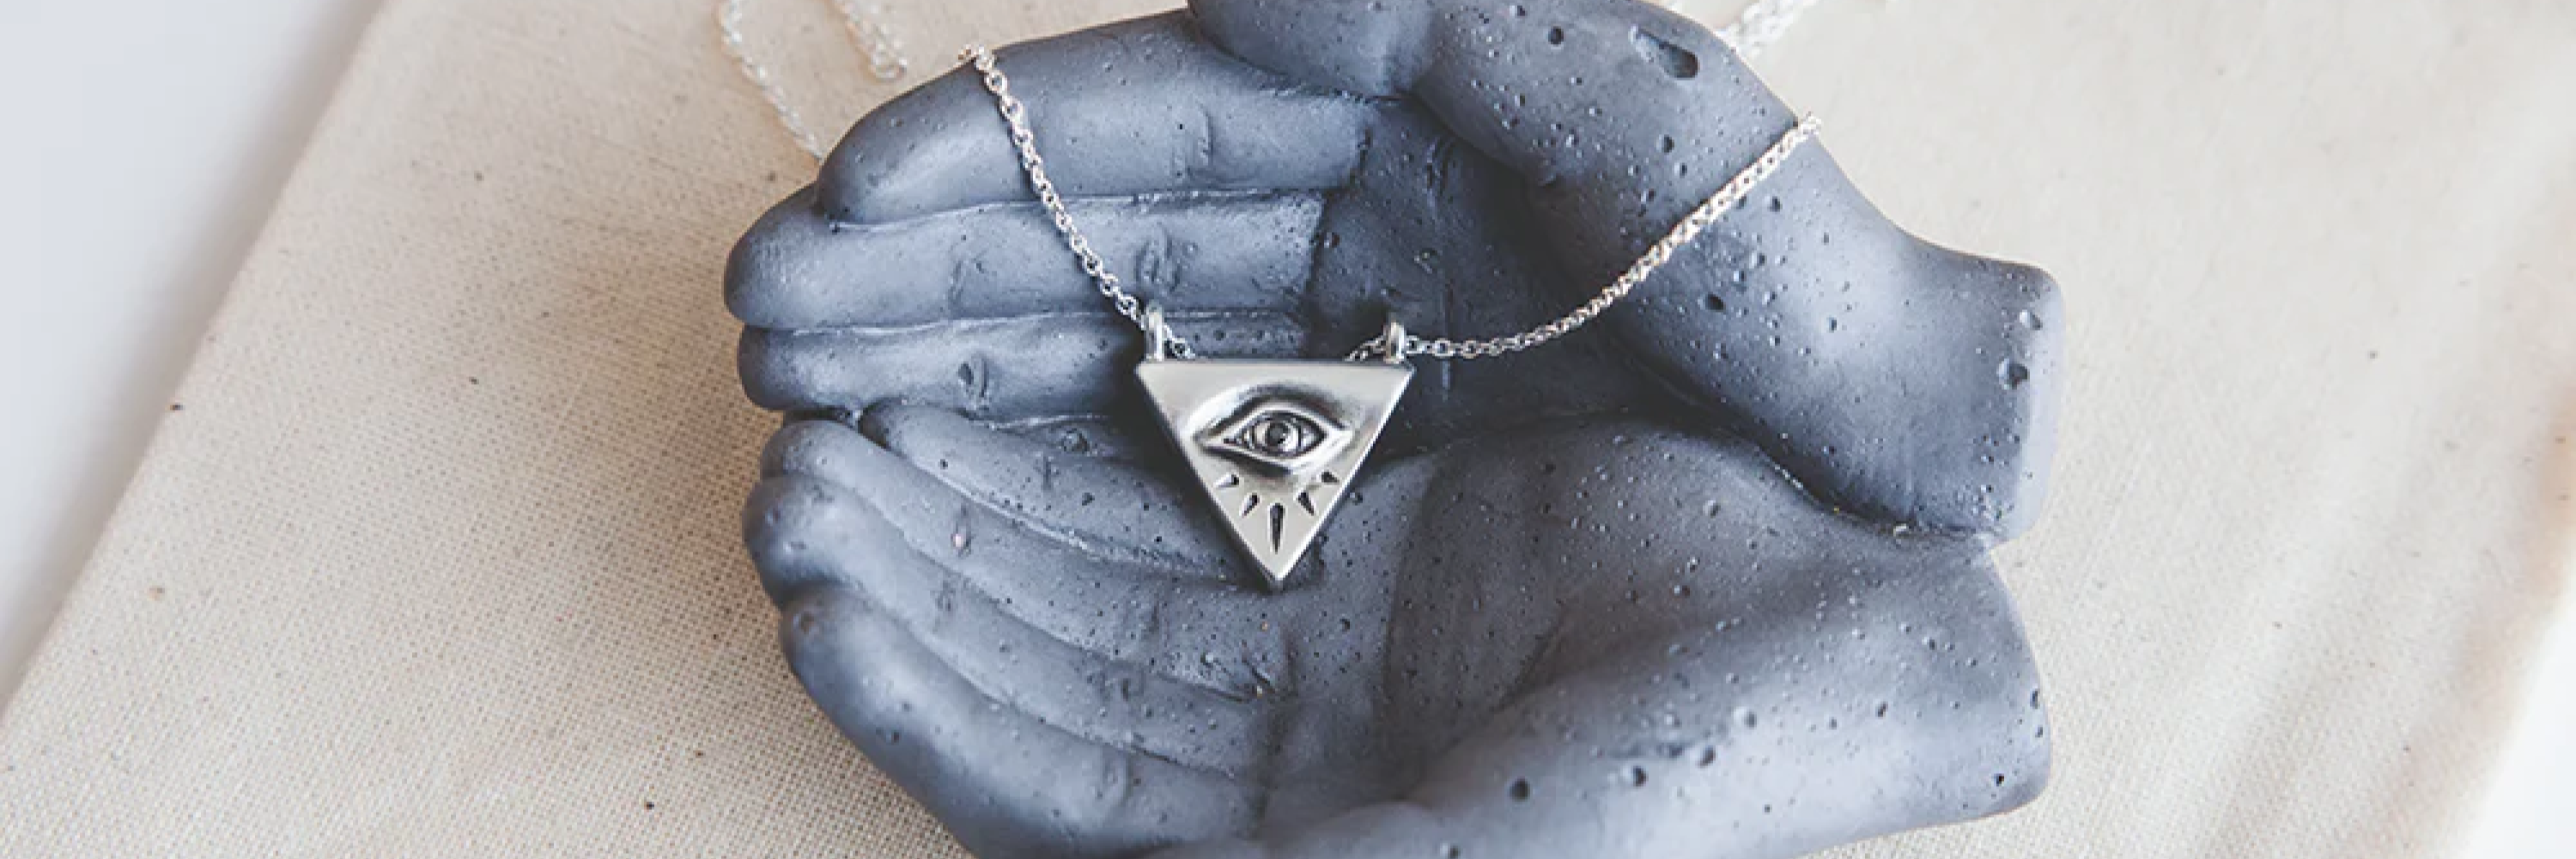 Evil eye collection